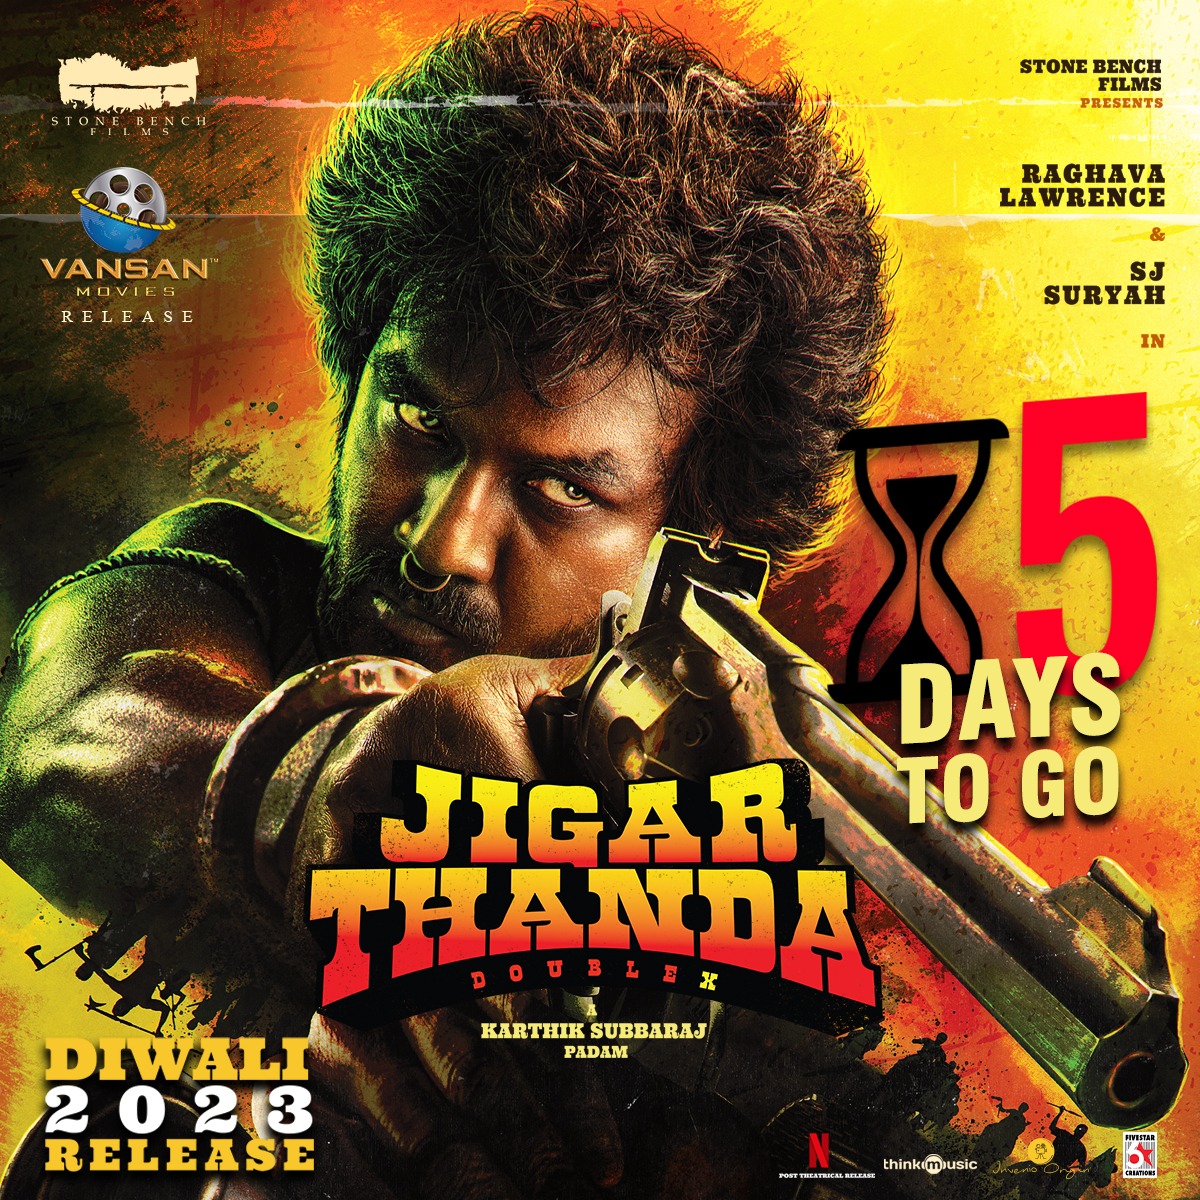 #JigarthandaDoubleX in cinemas worldwide in 5 days. Save this note — it’s a film everyone's going to appreciate. Karthik Subbaraj returns with a theatrical release after 4 years! 🔥